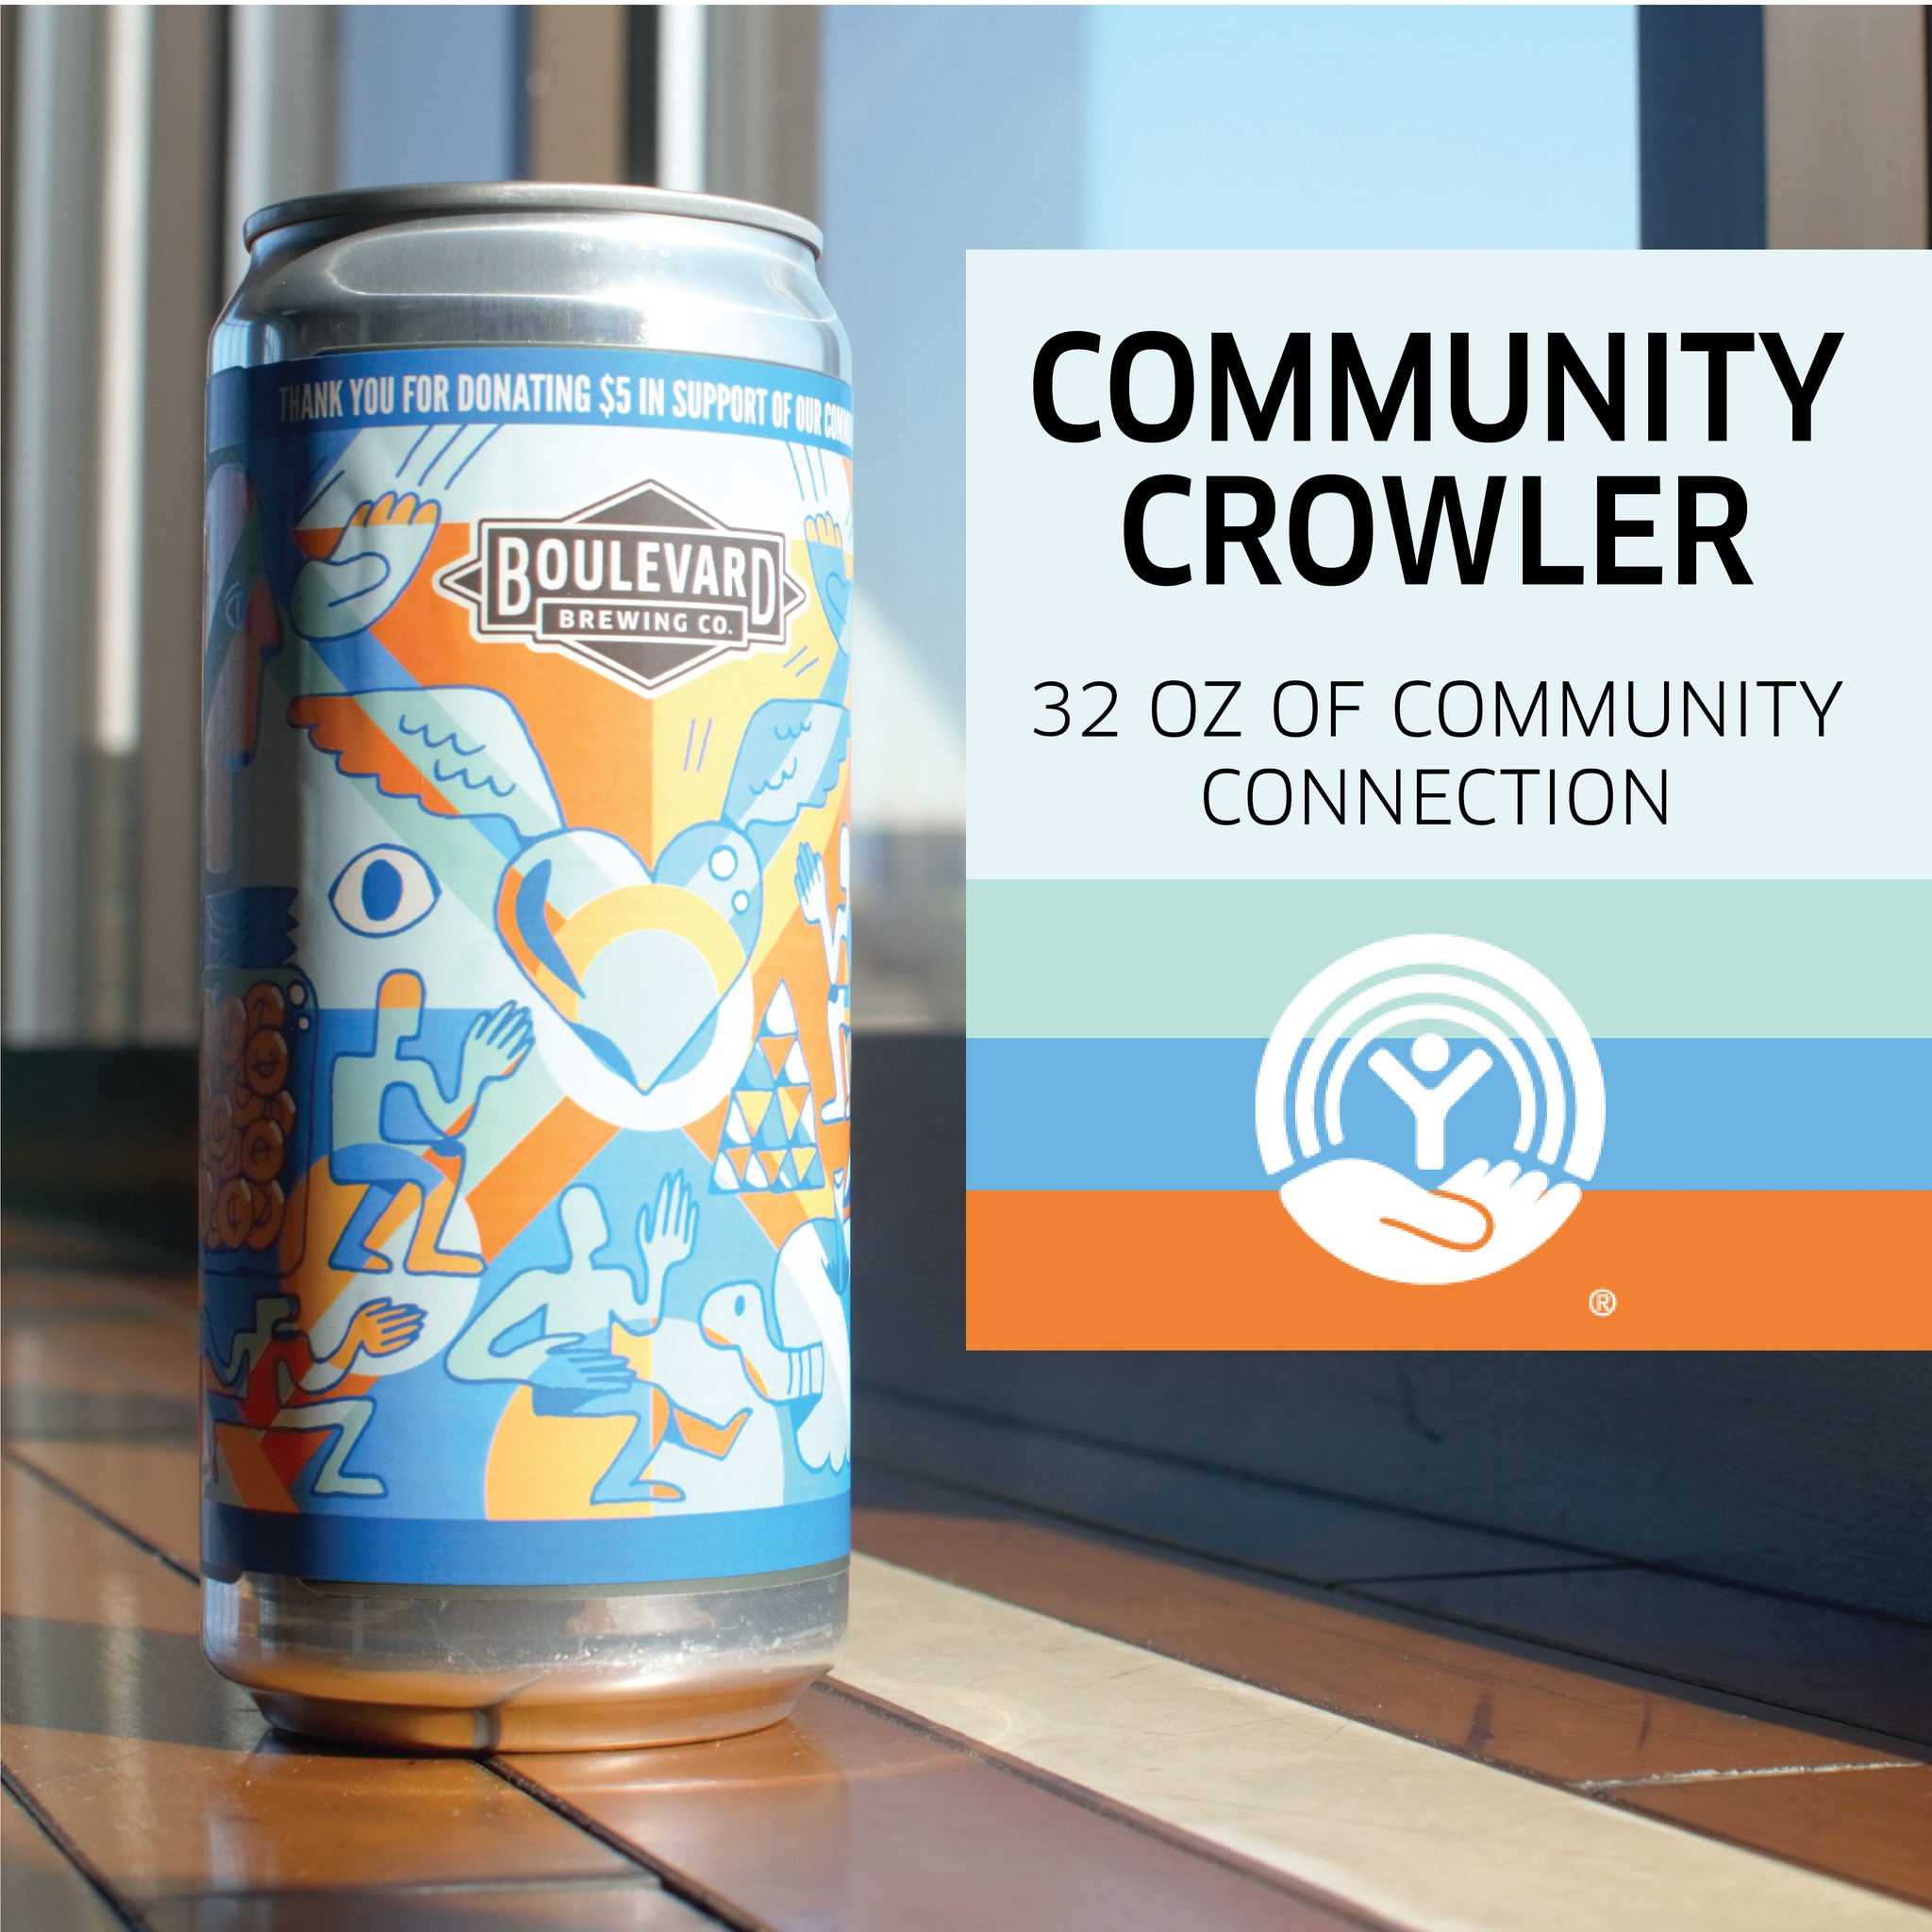 Boulevard Unites with United Way for its Community Crowler Program 